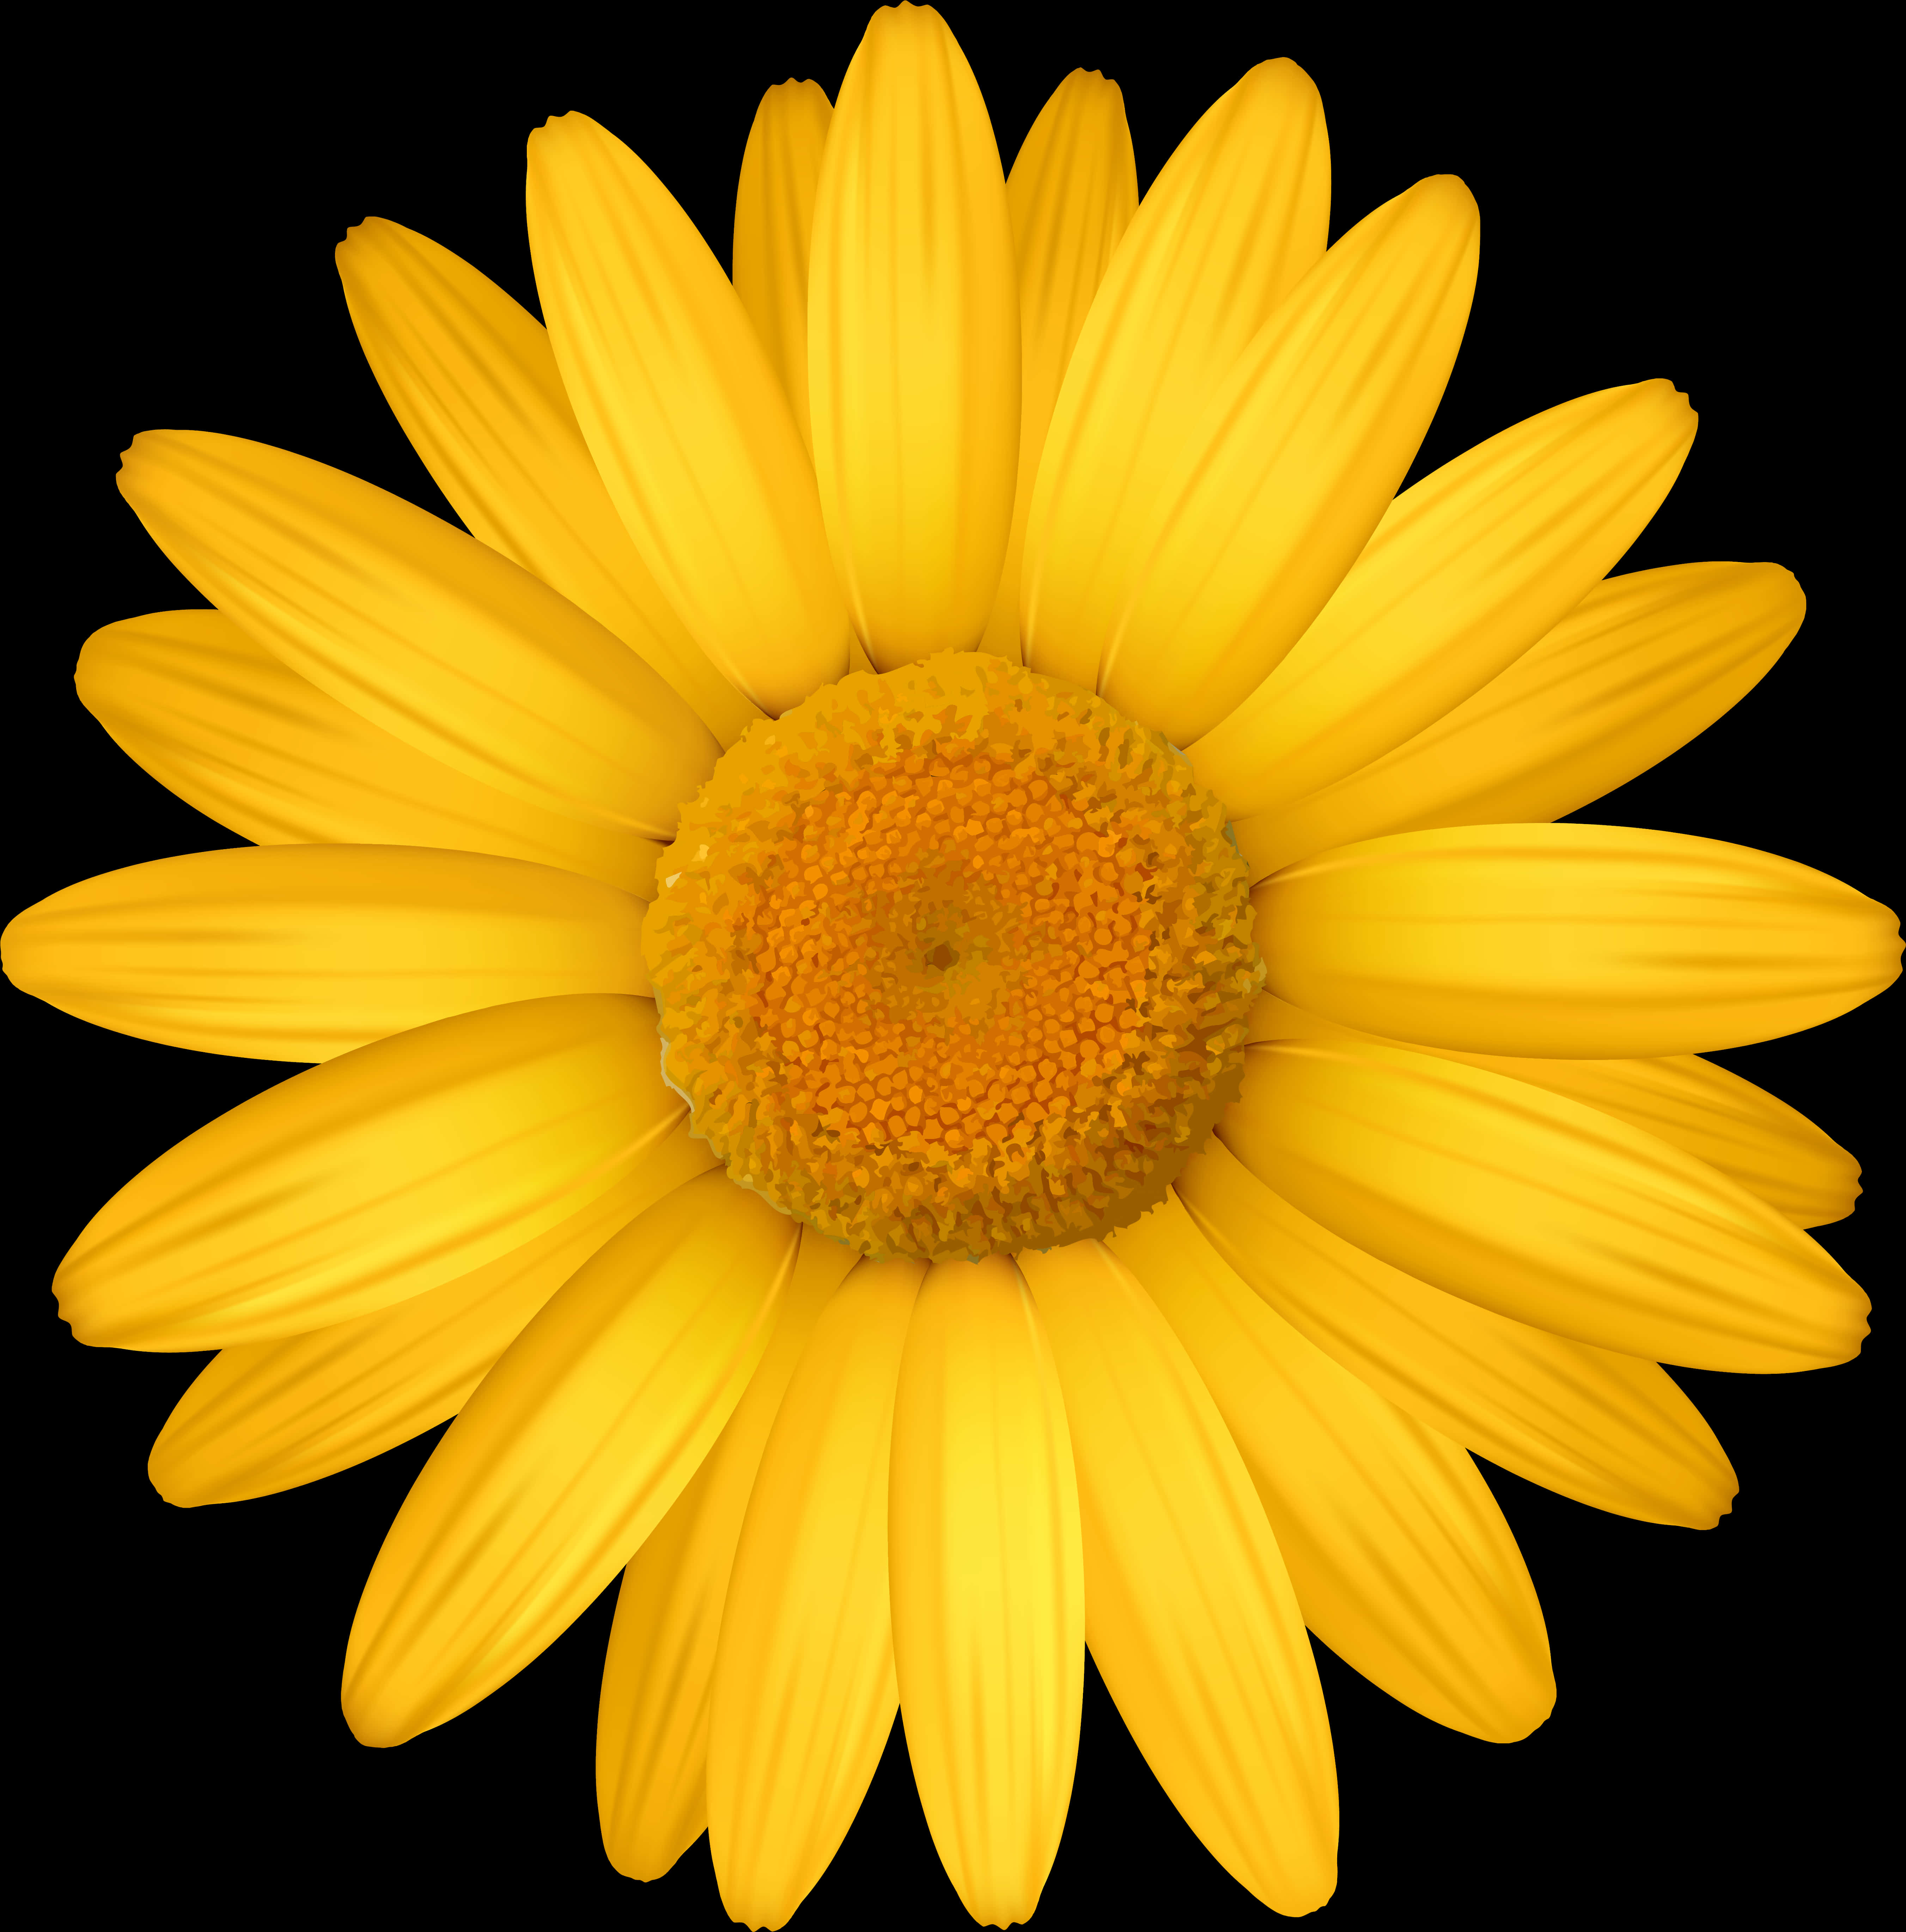 A Yellow Flower With Petals